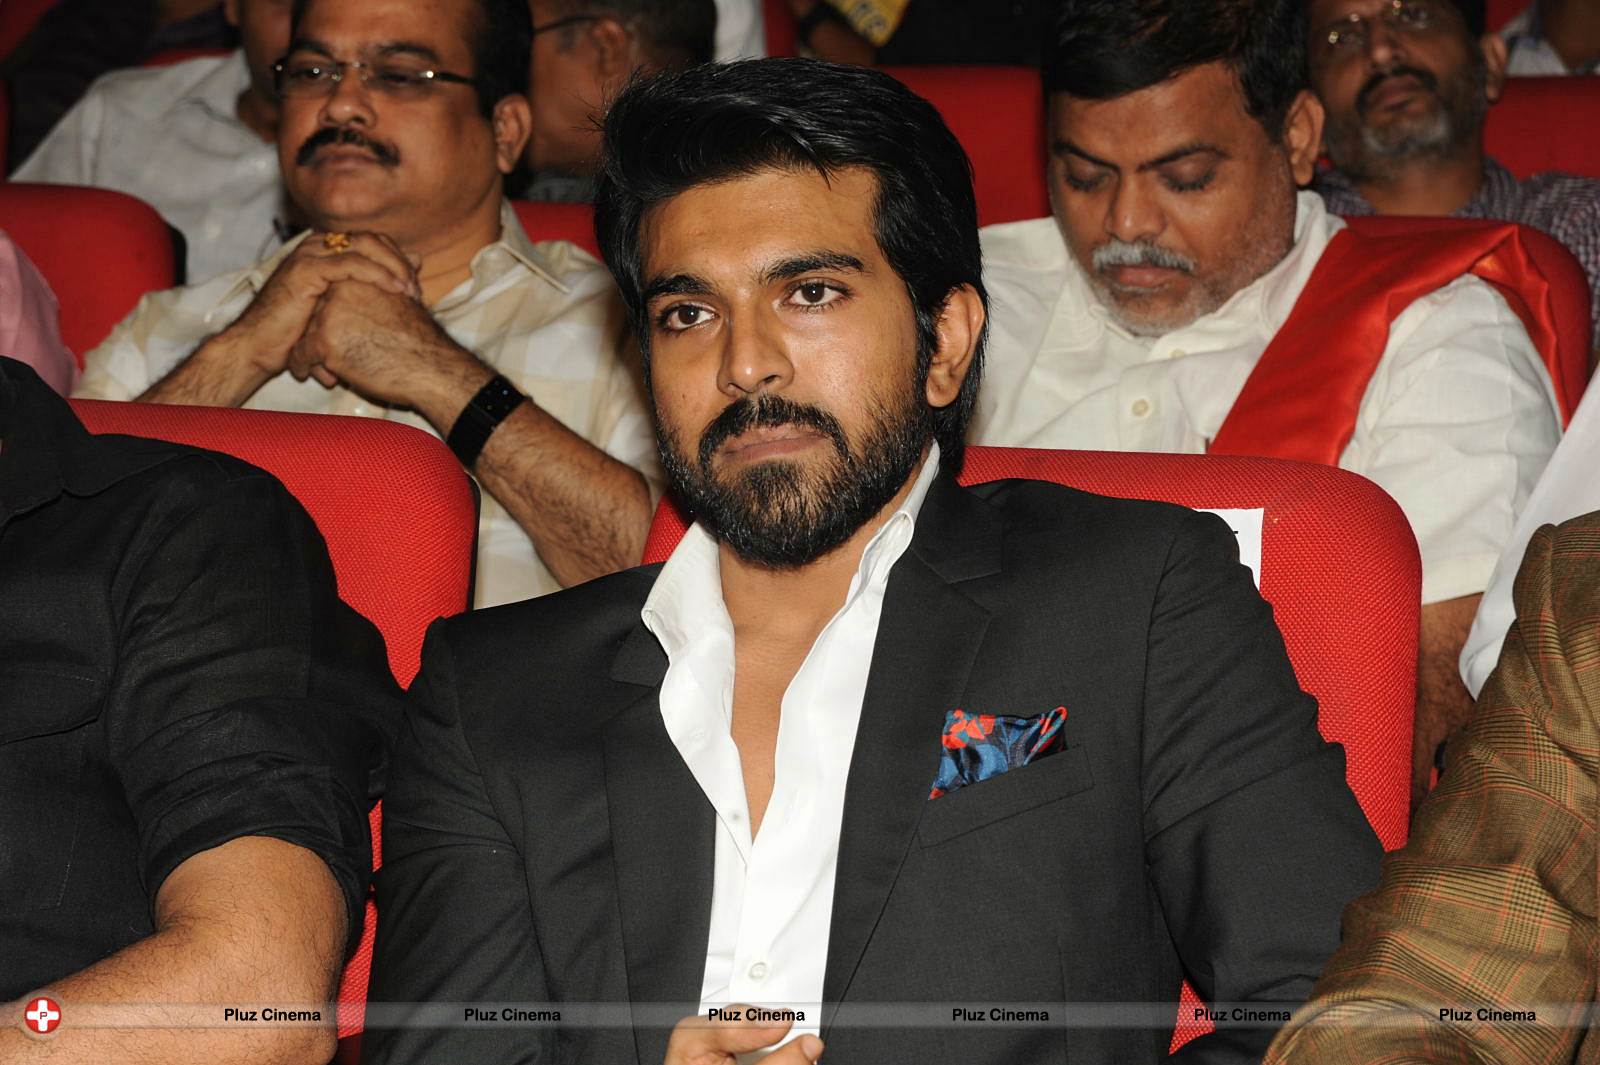 Ram Charan Teja - Toofan Audio Release Function Photos | Picture 553276